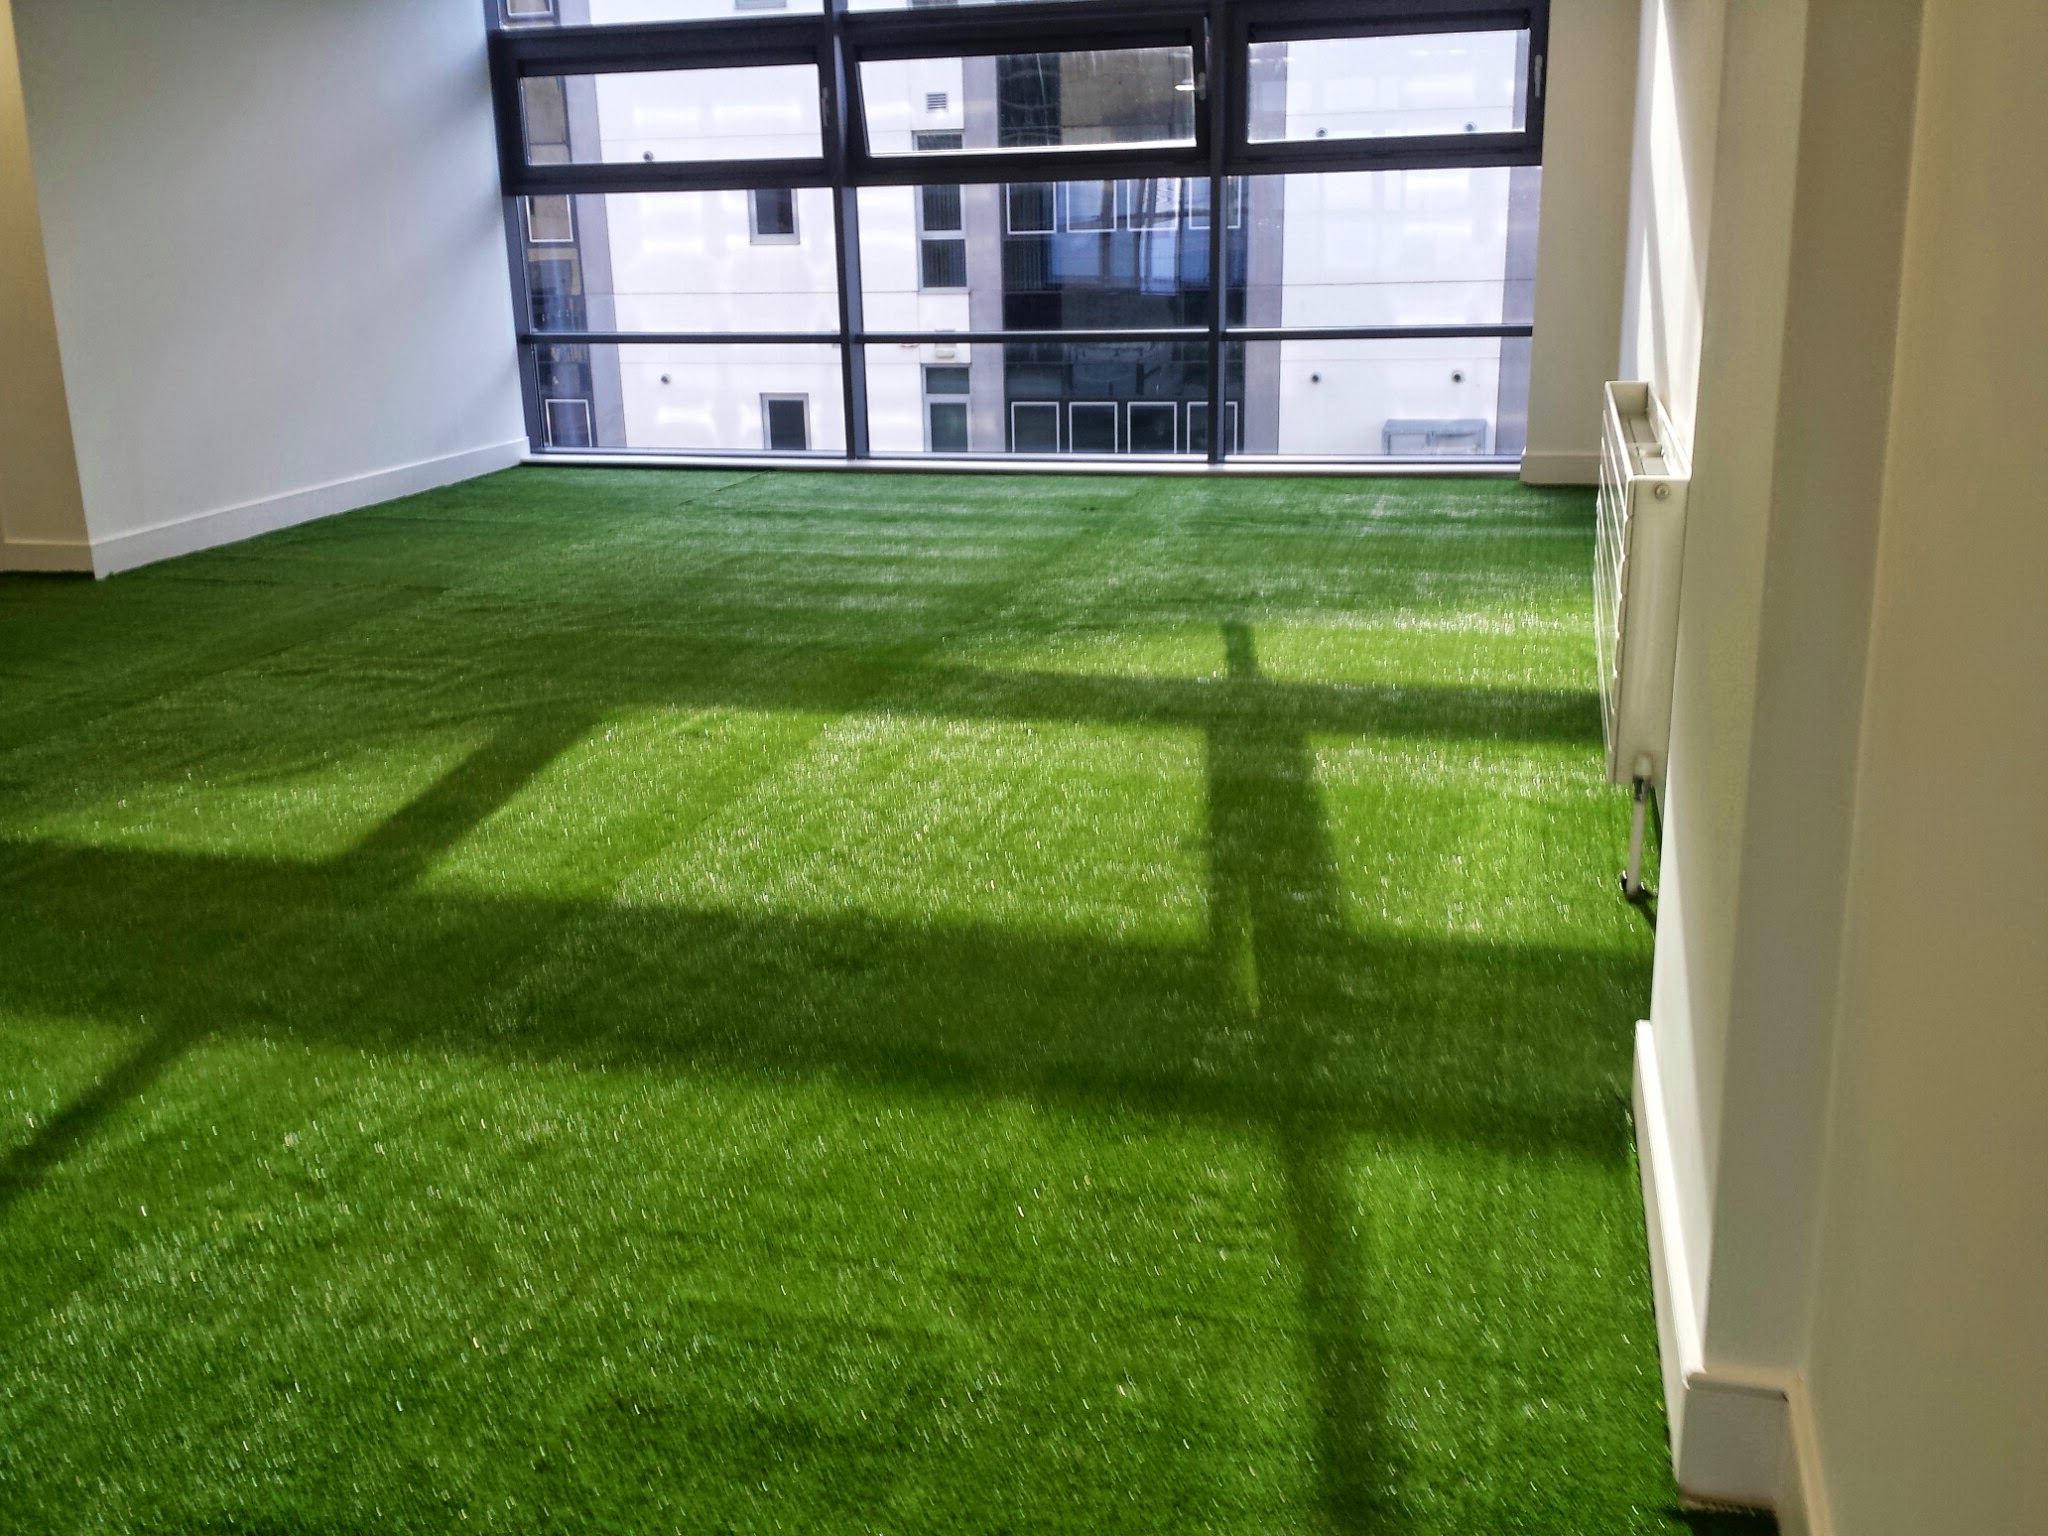 Conference room with grass